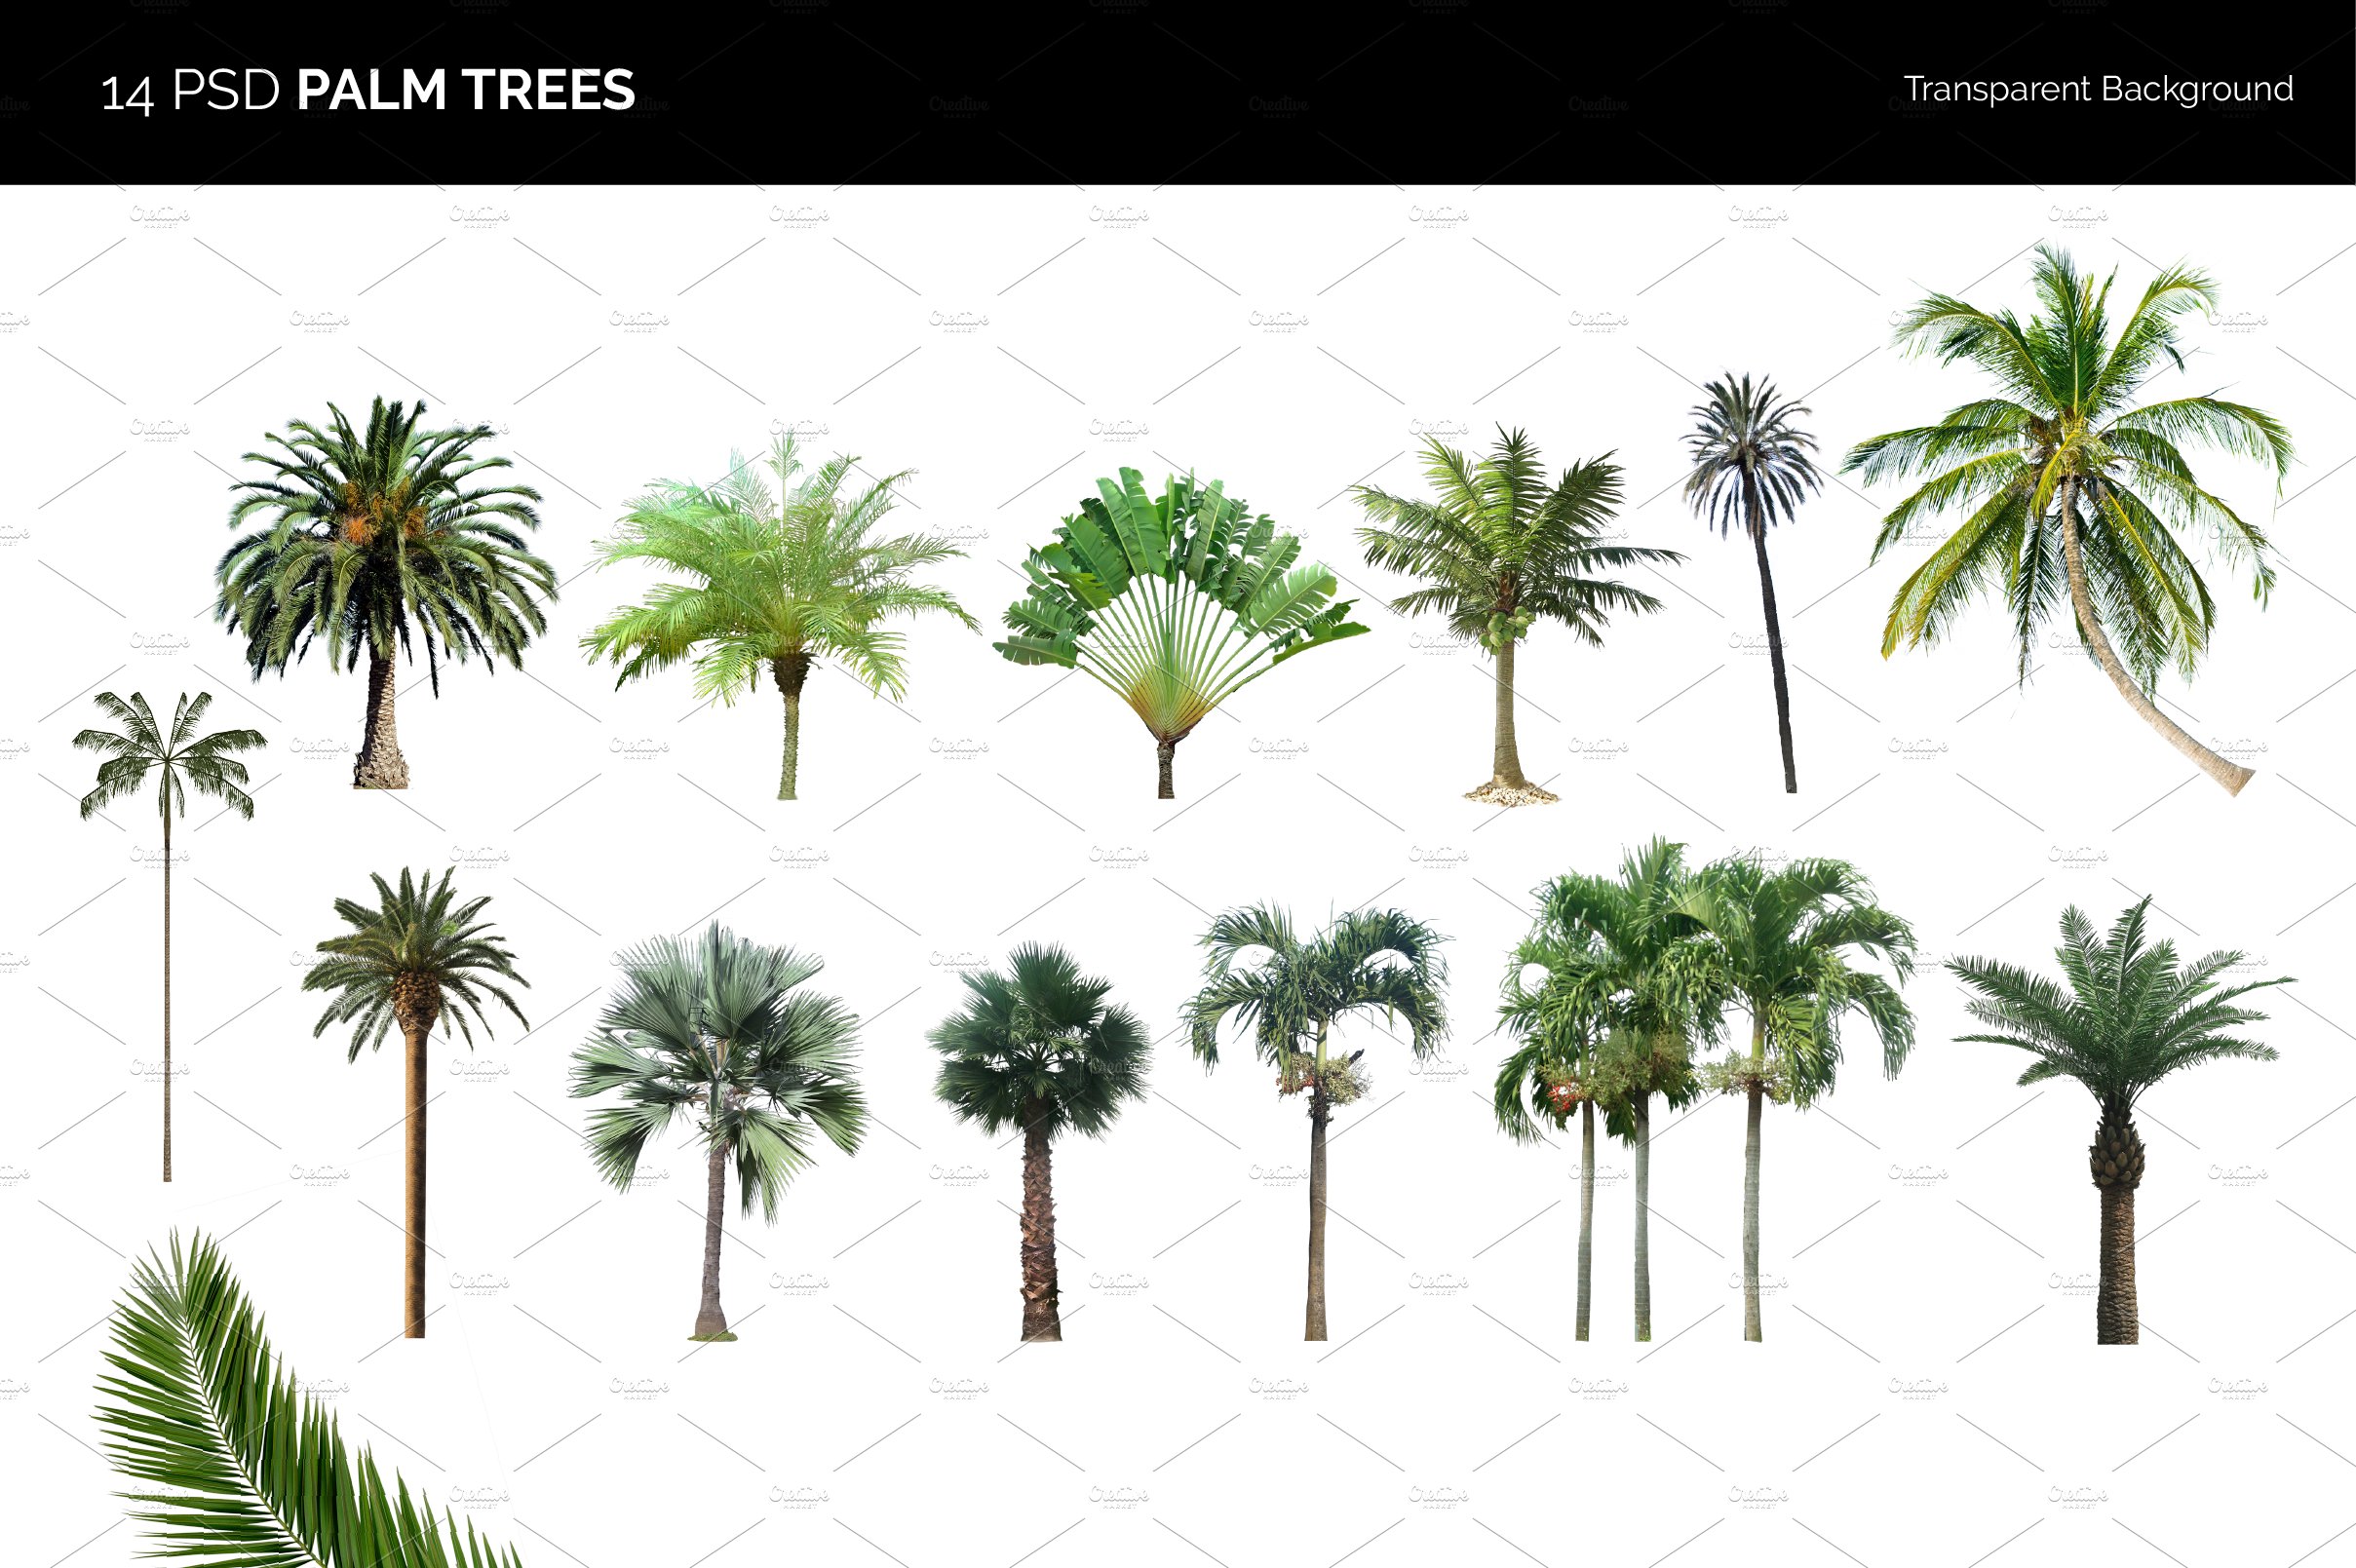 14 PSD Palm Trees cover image.